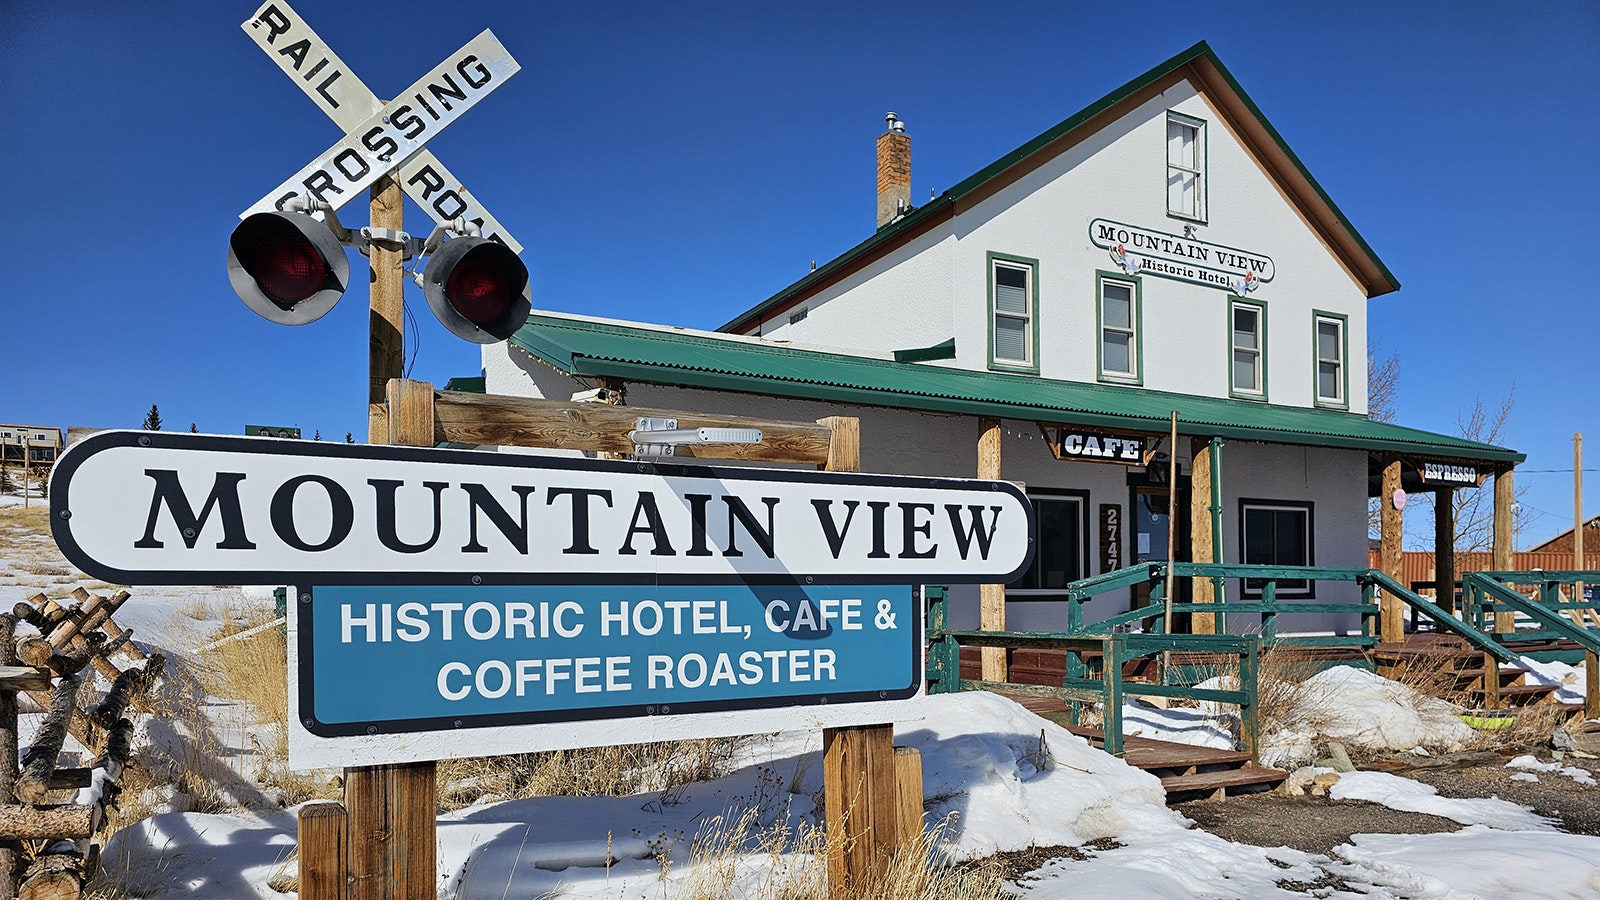 The 117-year-old Mountain View Historic Hotel & Café in Centennial, Wyoming.